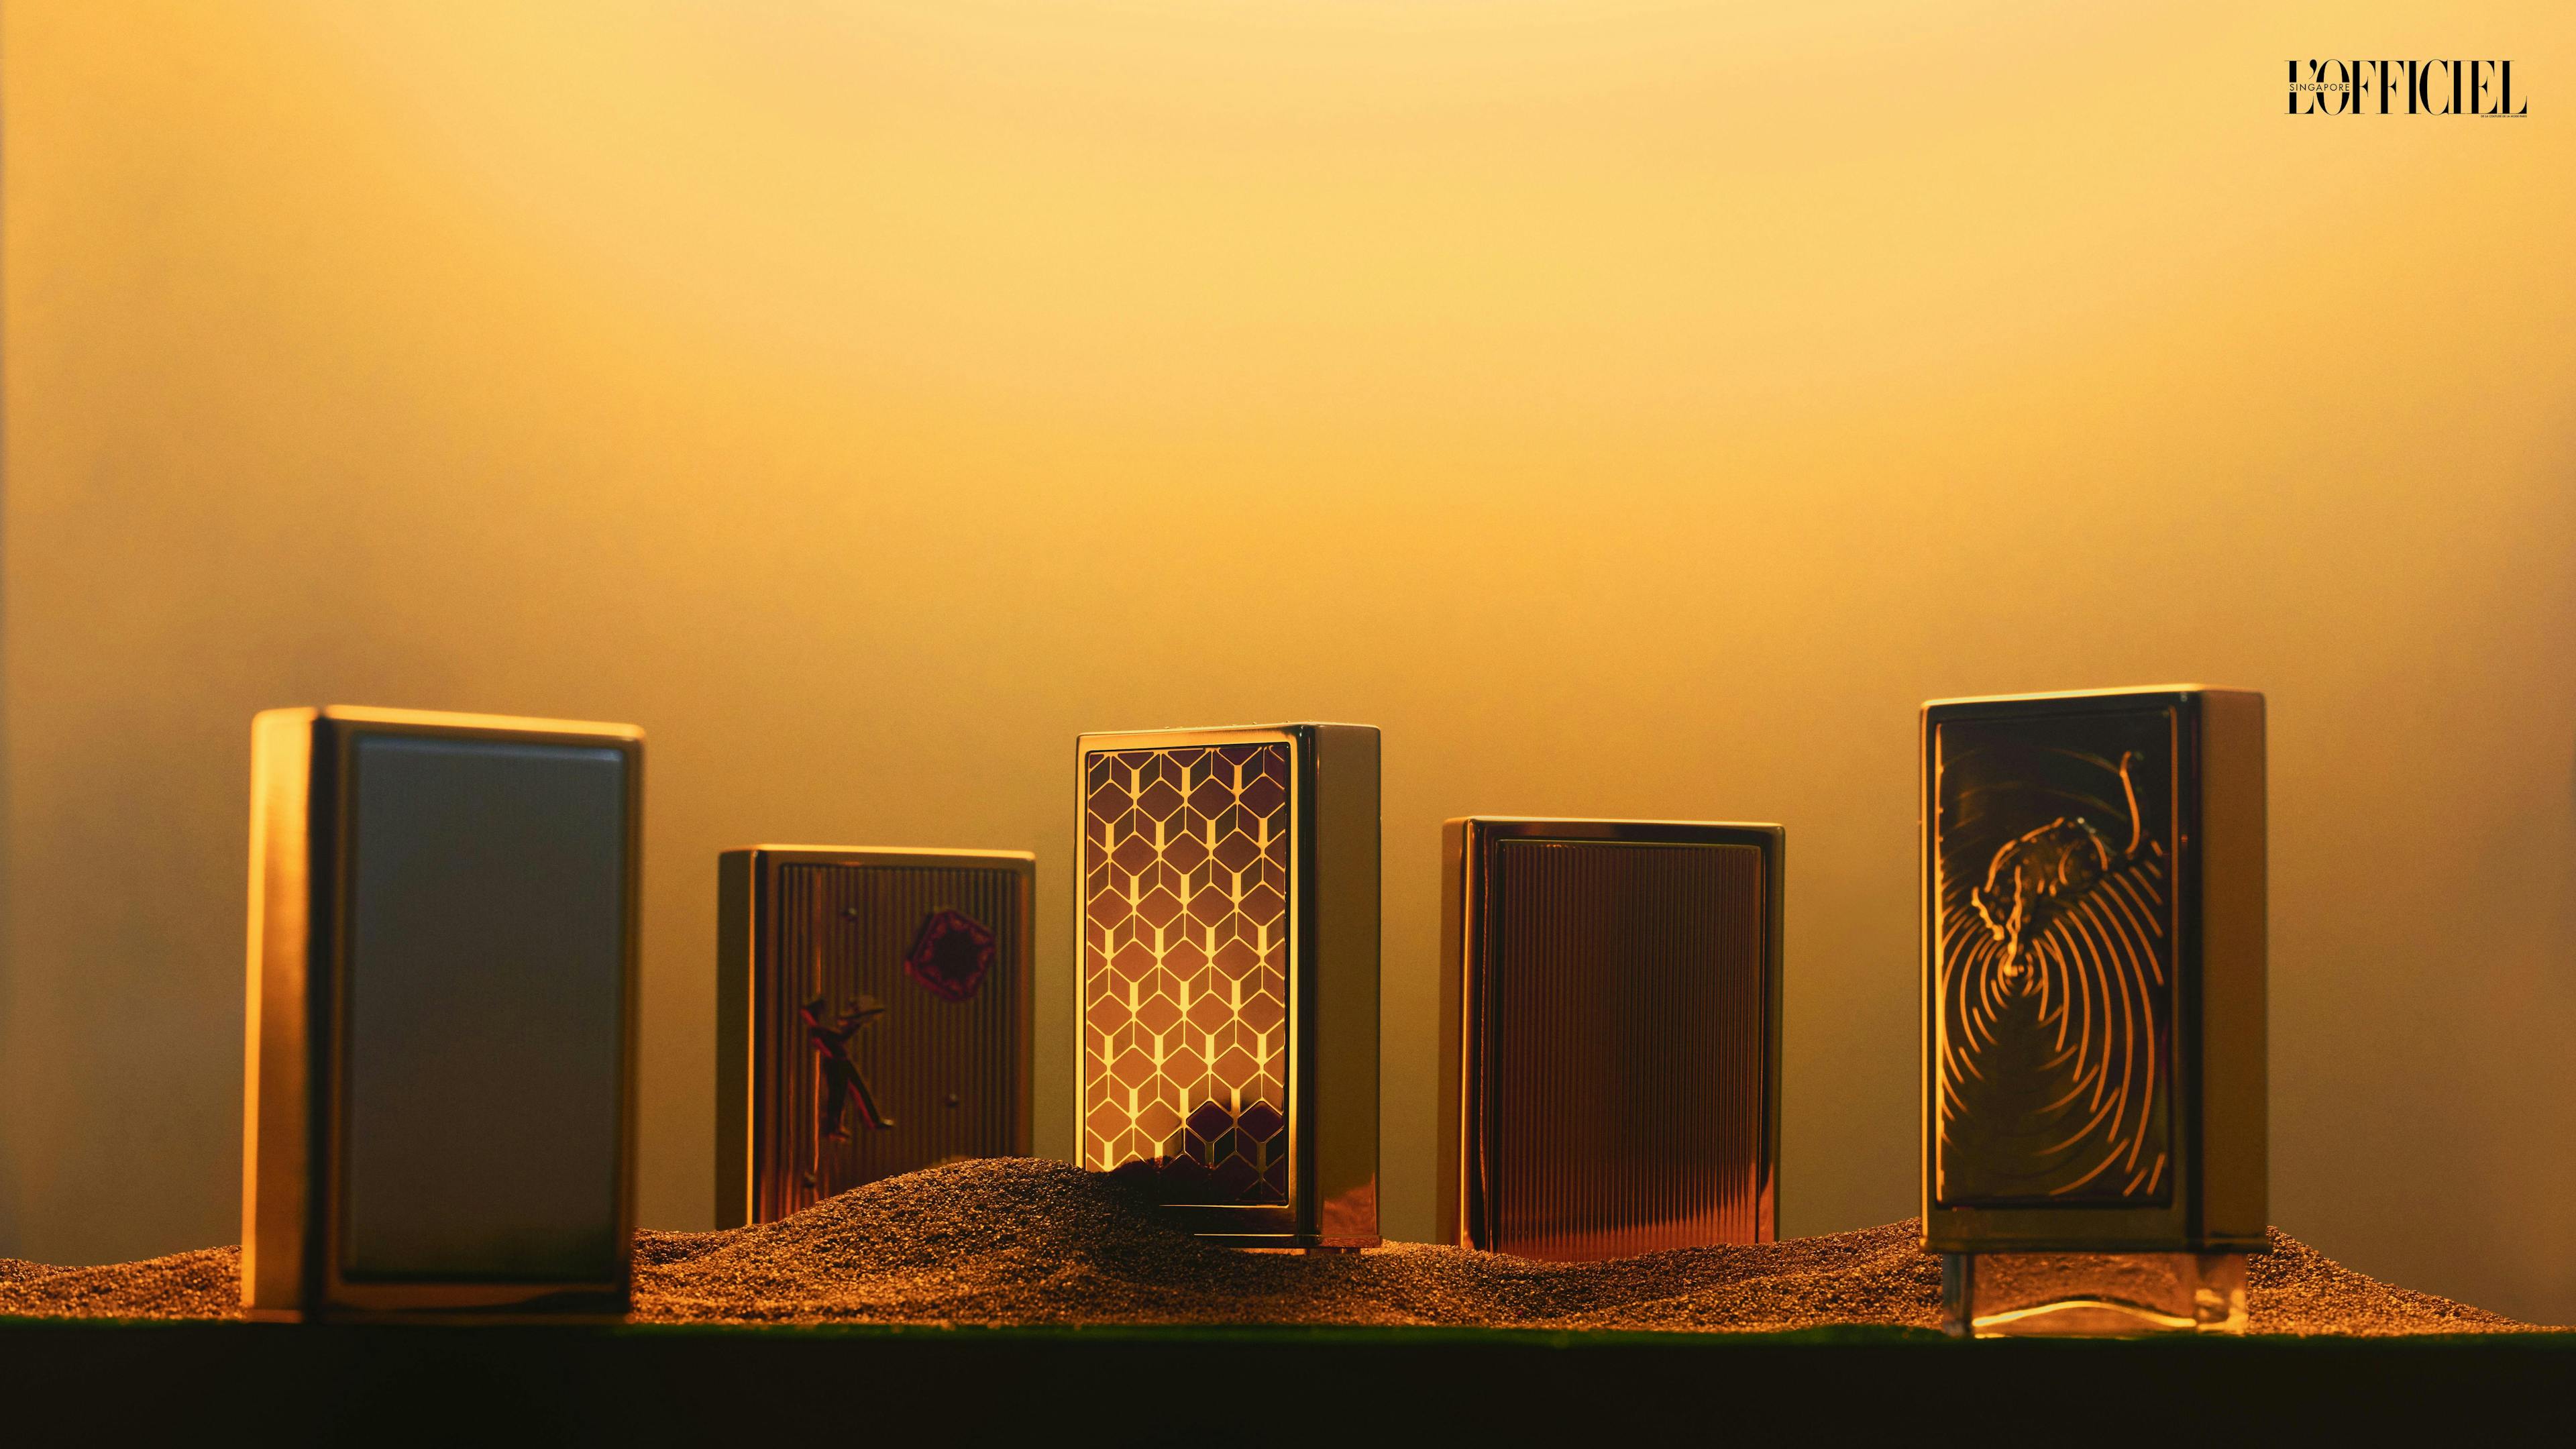 CARTIER NÉCESSAIRES À PARFUM SILVERY CASE, $690, DIABOLO CASE, $1,480, RED DOT CASE, $1,200, GOLDENCASE,$690,AND LAPANTHÈRECASEWITHLA PANTHÈRE FRAGRANCE, $830. Since its launch a year ago, the Cartier Nécessaires à Parfum Collection remains one of the Maison’s finest objects of desire. Now, the house has introduced a new design to its range of vanity cases — a red lacquered style elevated with a geometric motif that pays homage to Cartier’s famous red case.